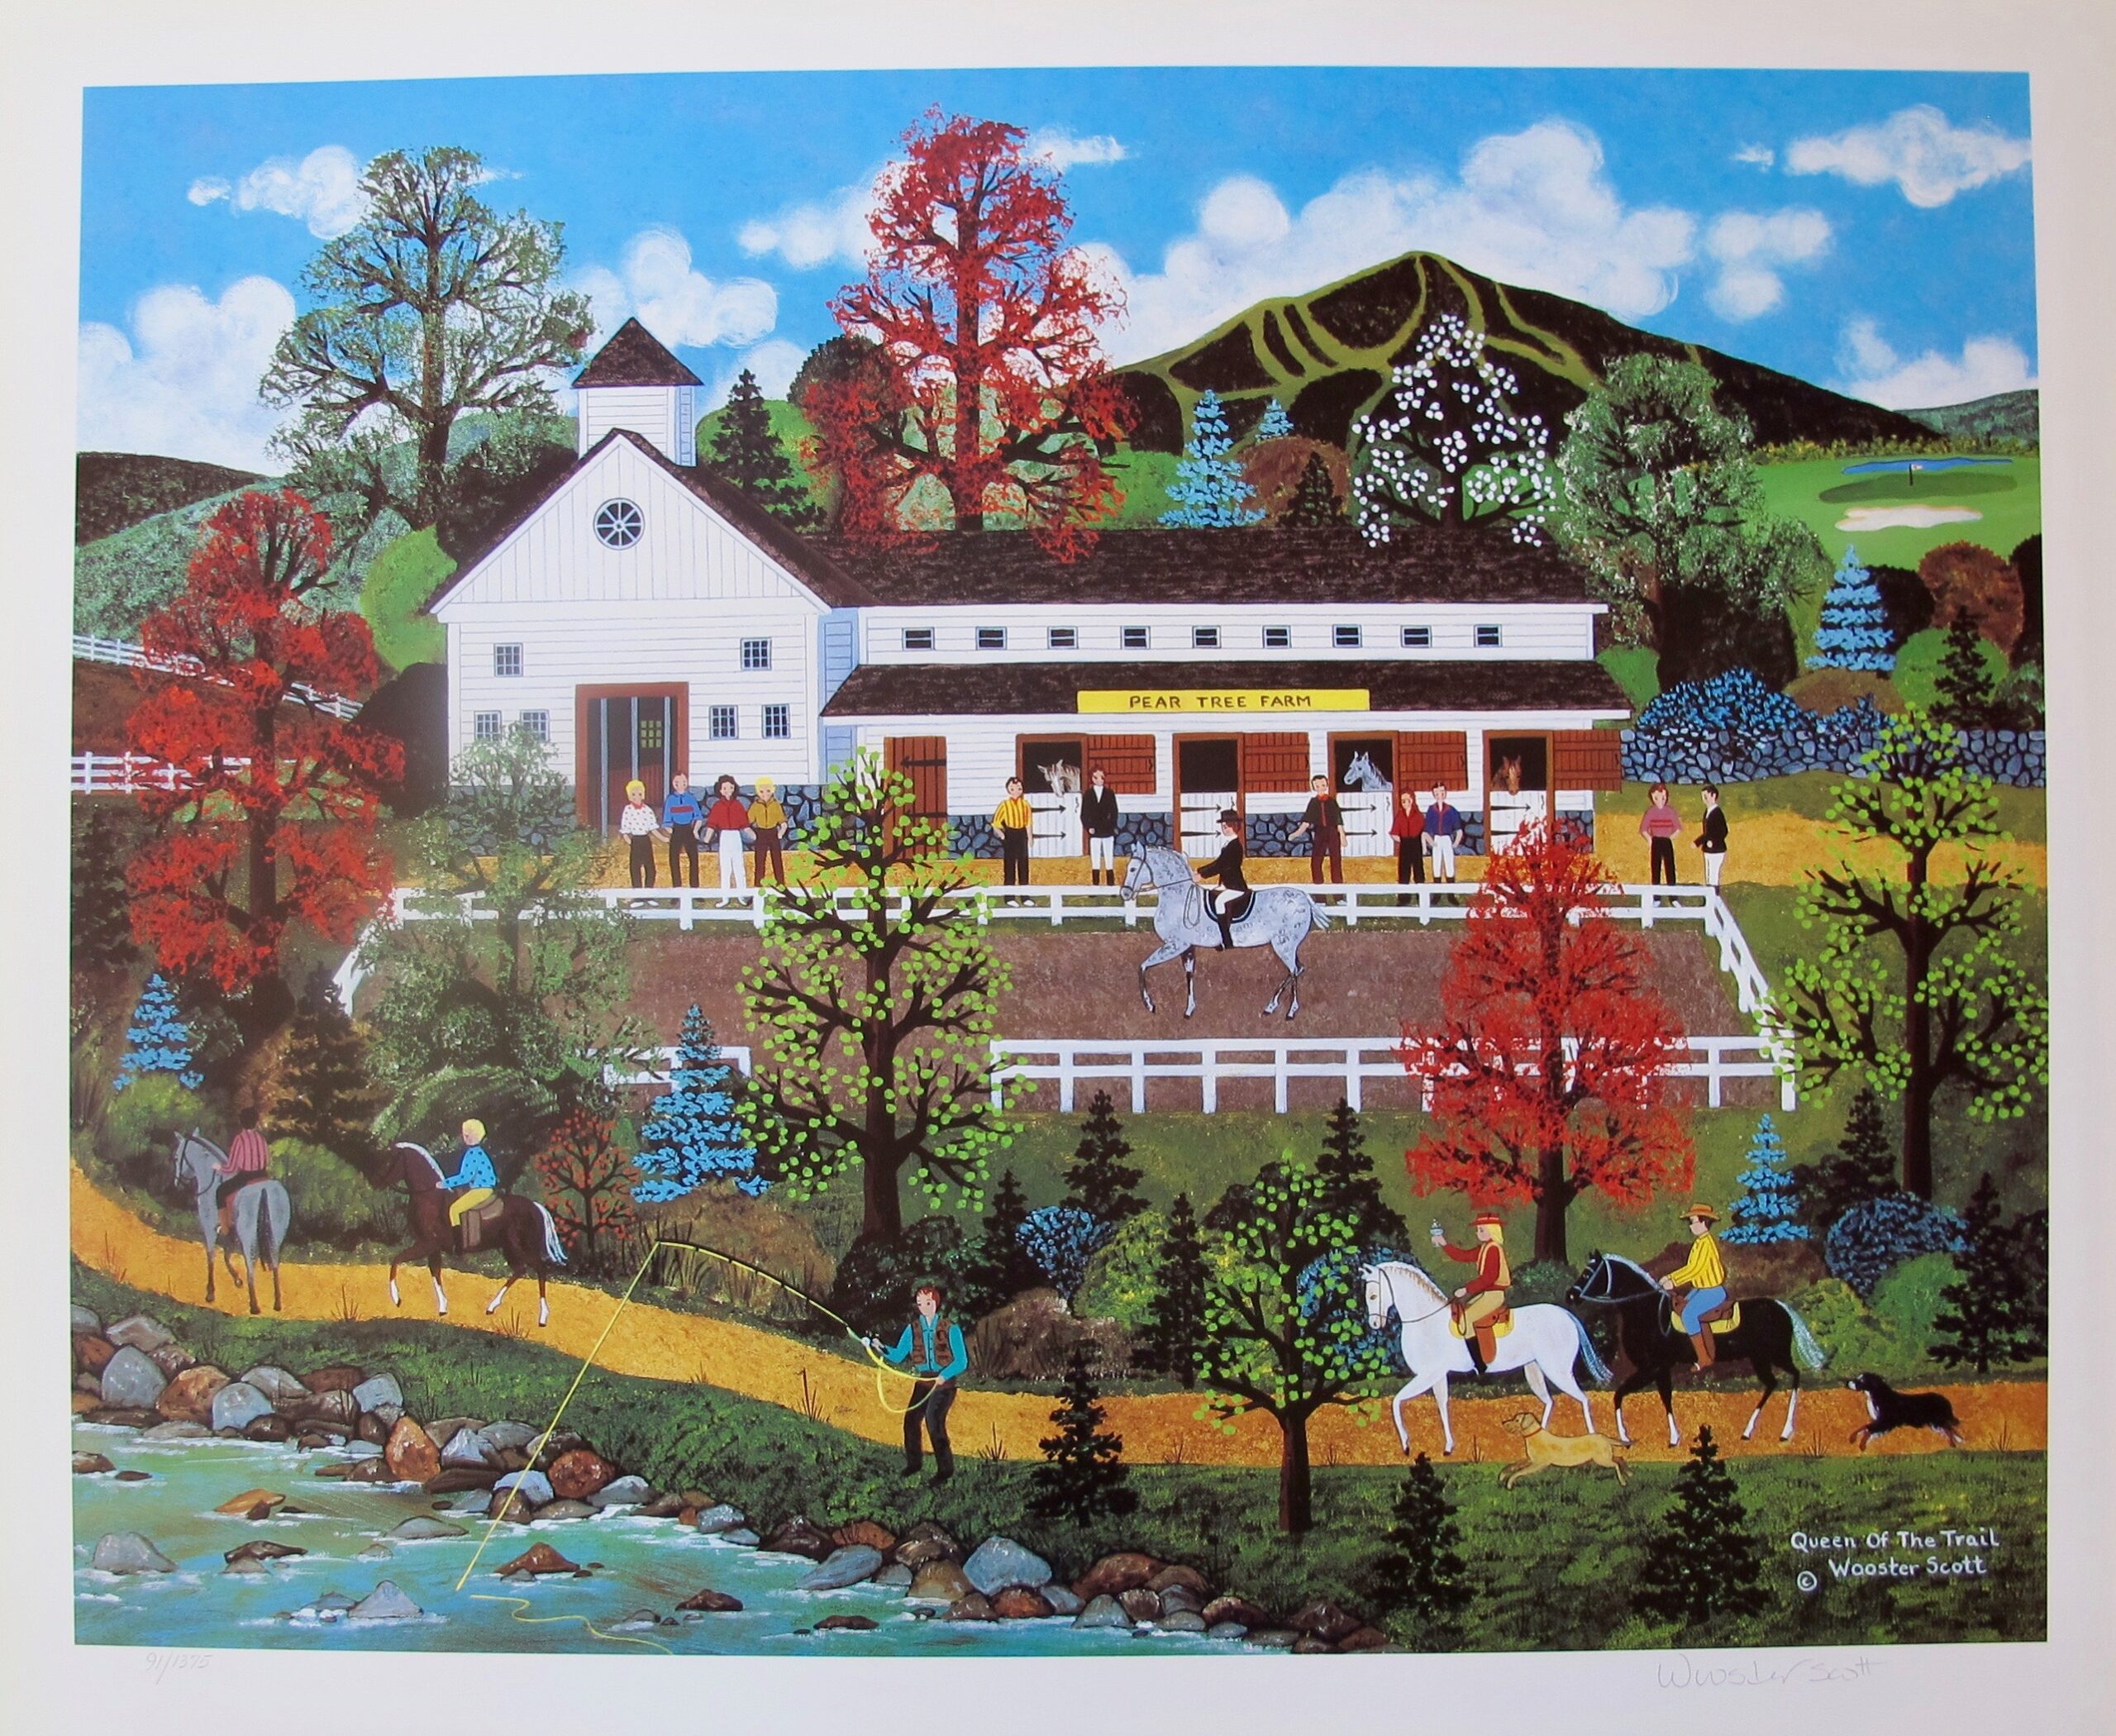 Jane Wooster Scott QUEEN OF THE TRAIL Hand Signed Limited Edition Lithograph